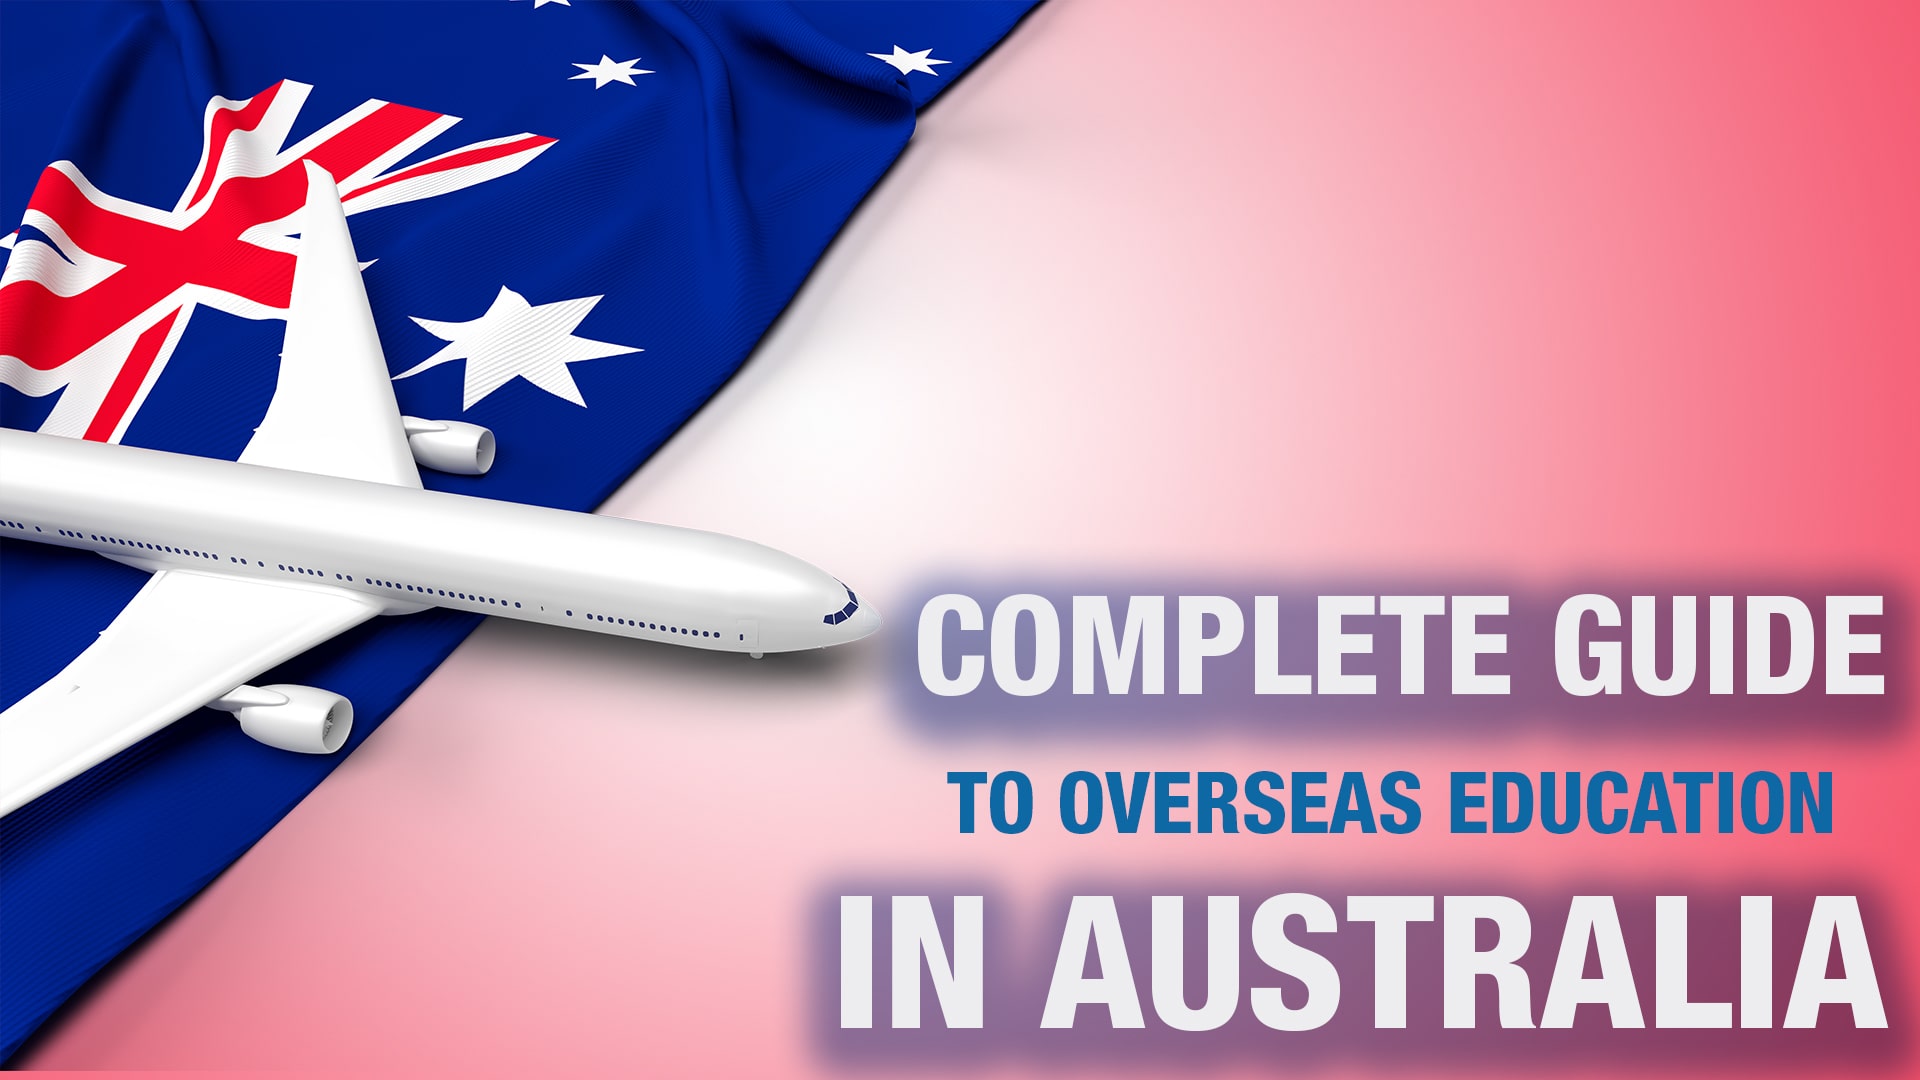 The Complete Guide to Overseas Education in Australia and Why It's the Best Choice?